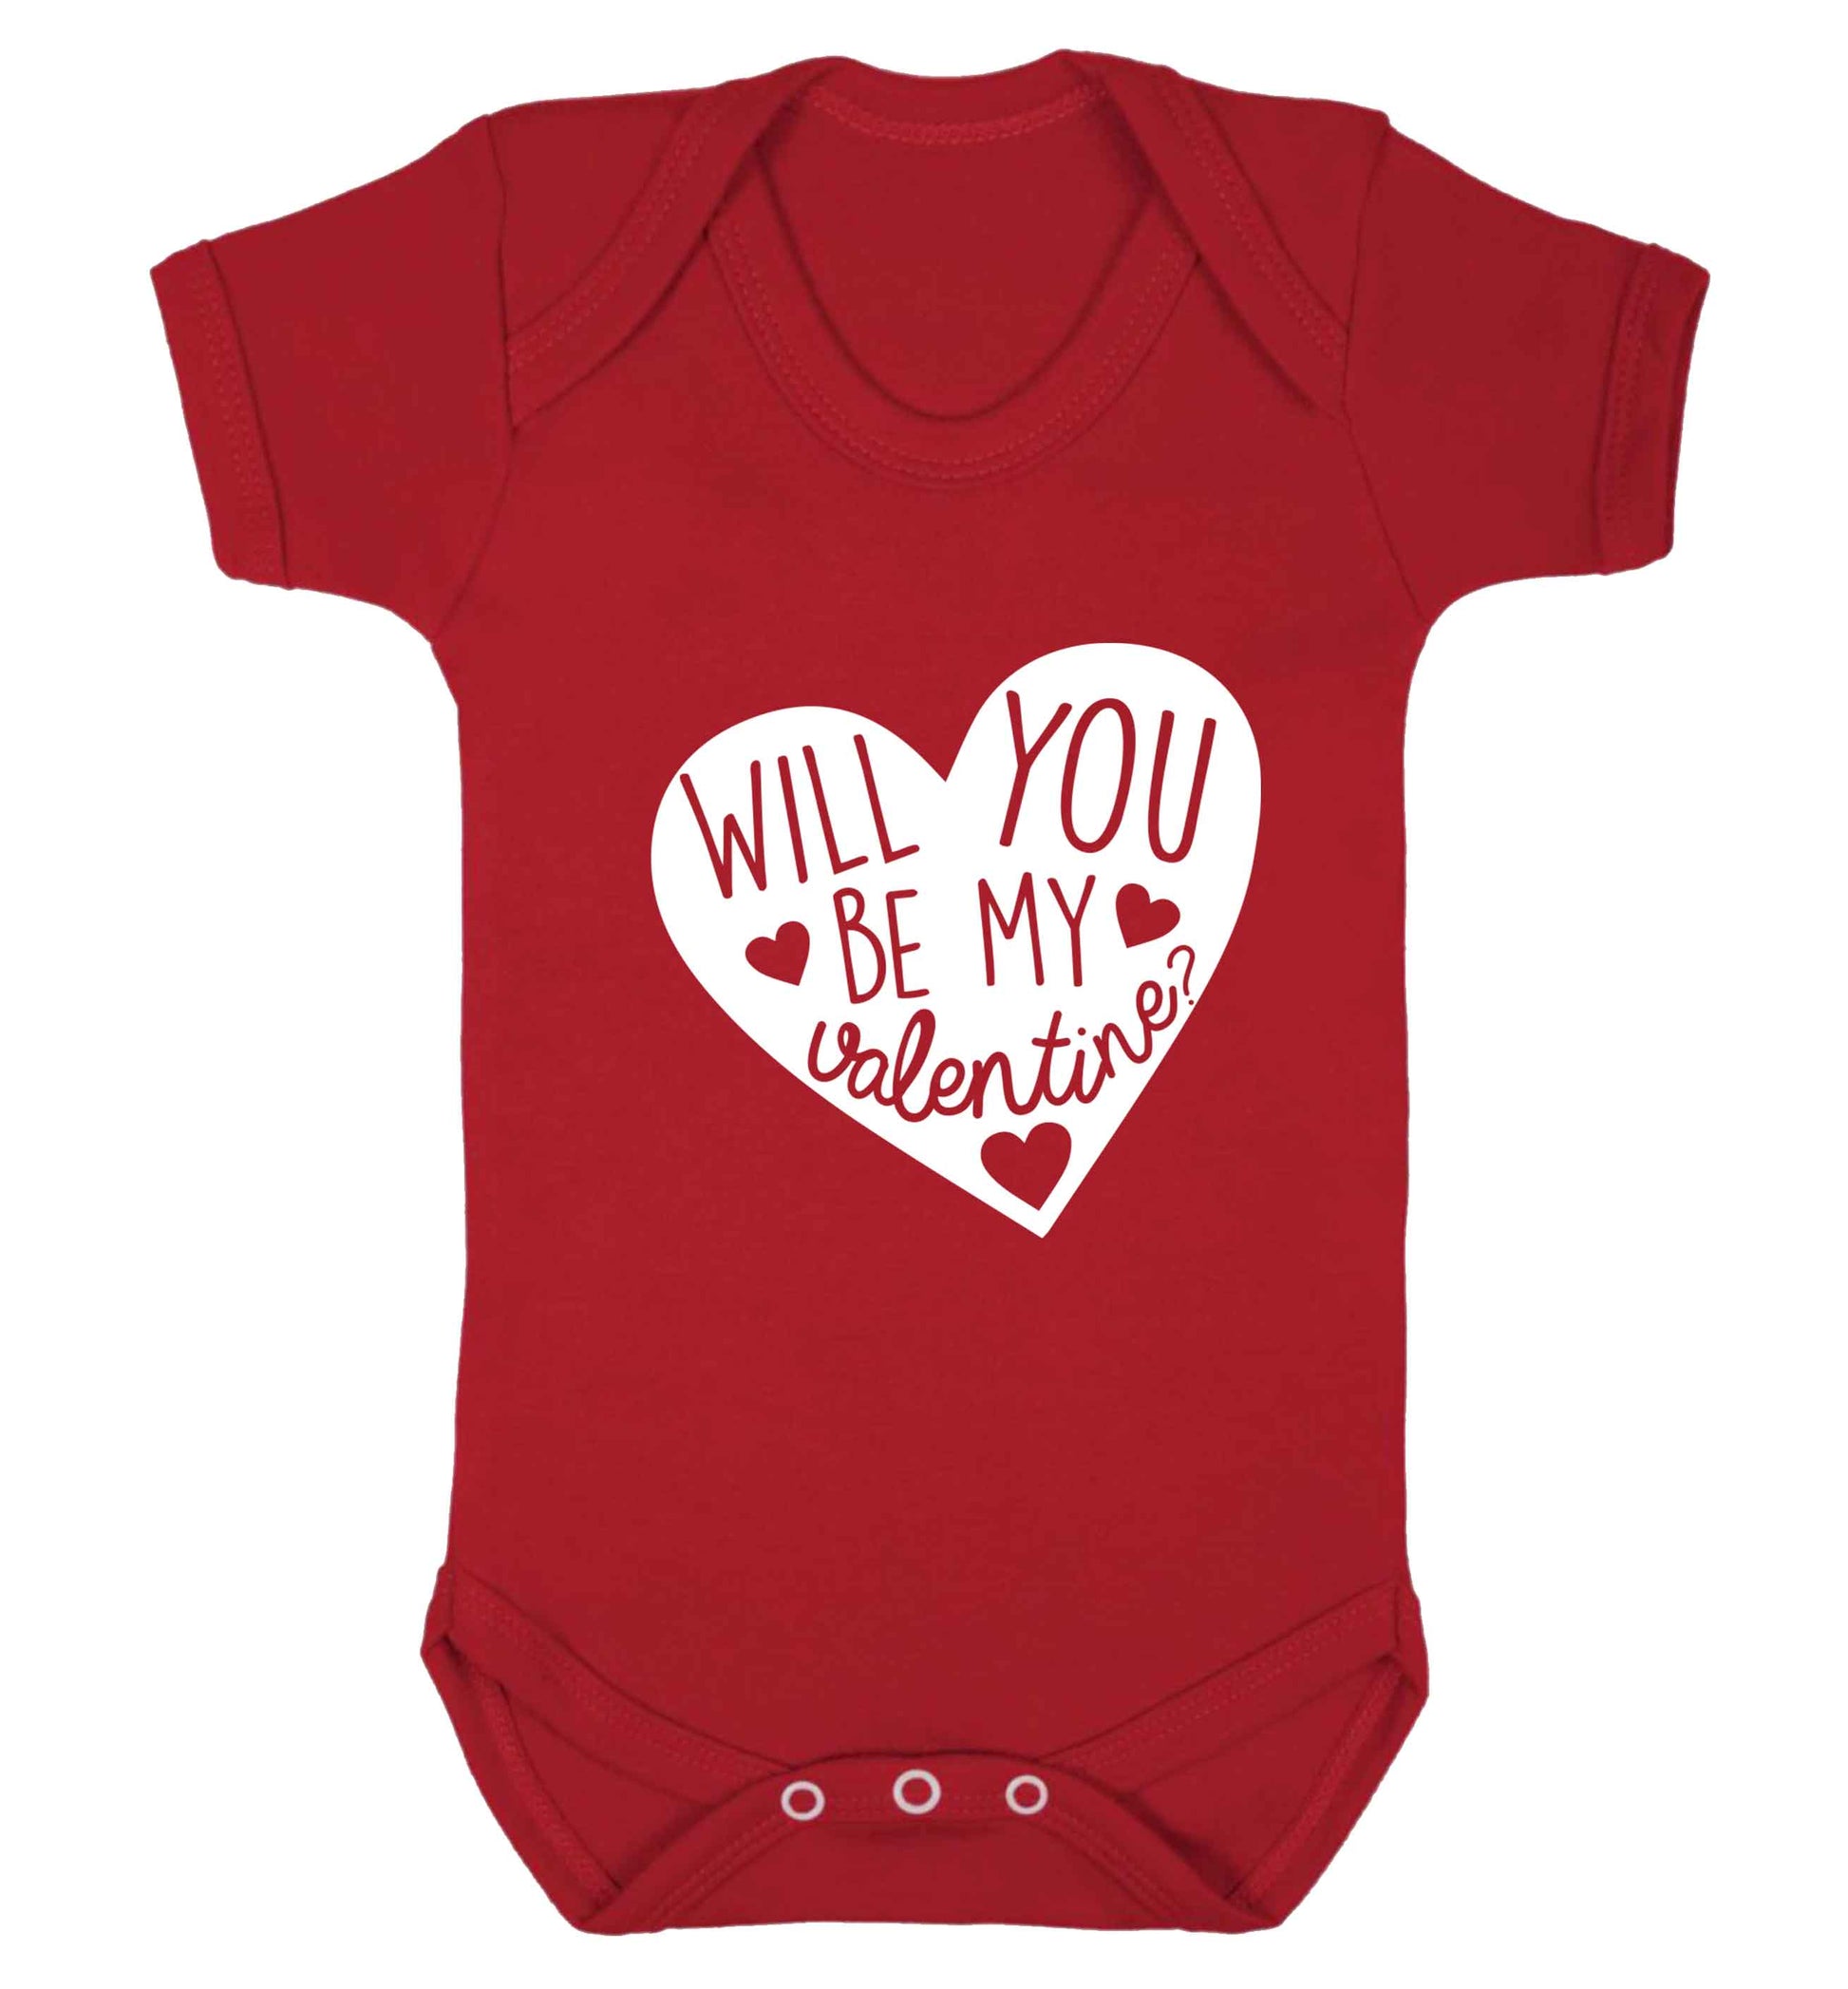 Will you be my valentine? baby vest red 18-24 months